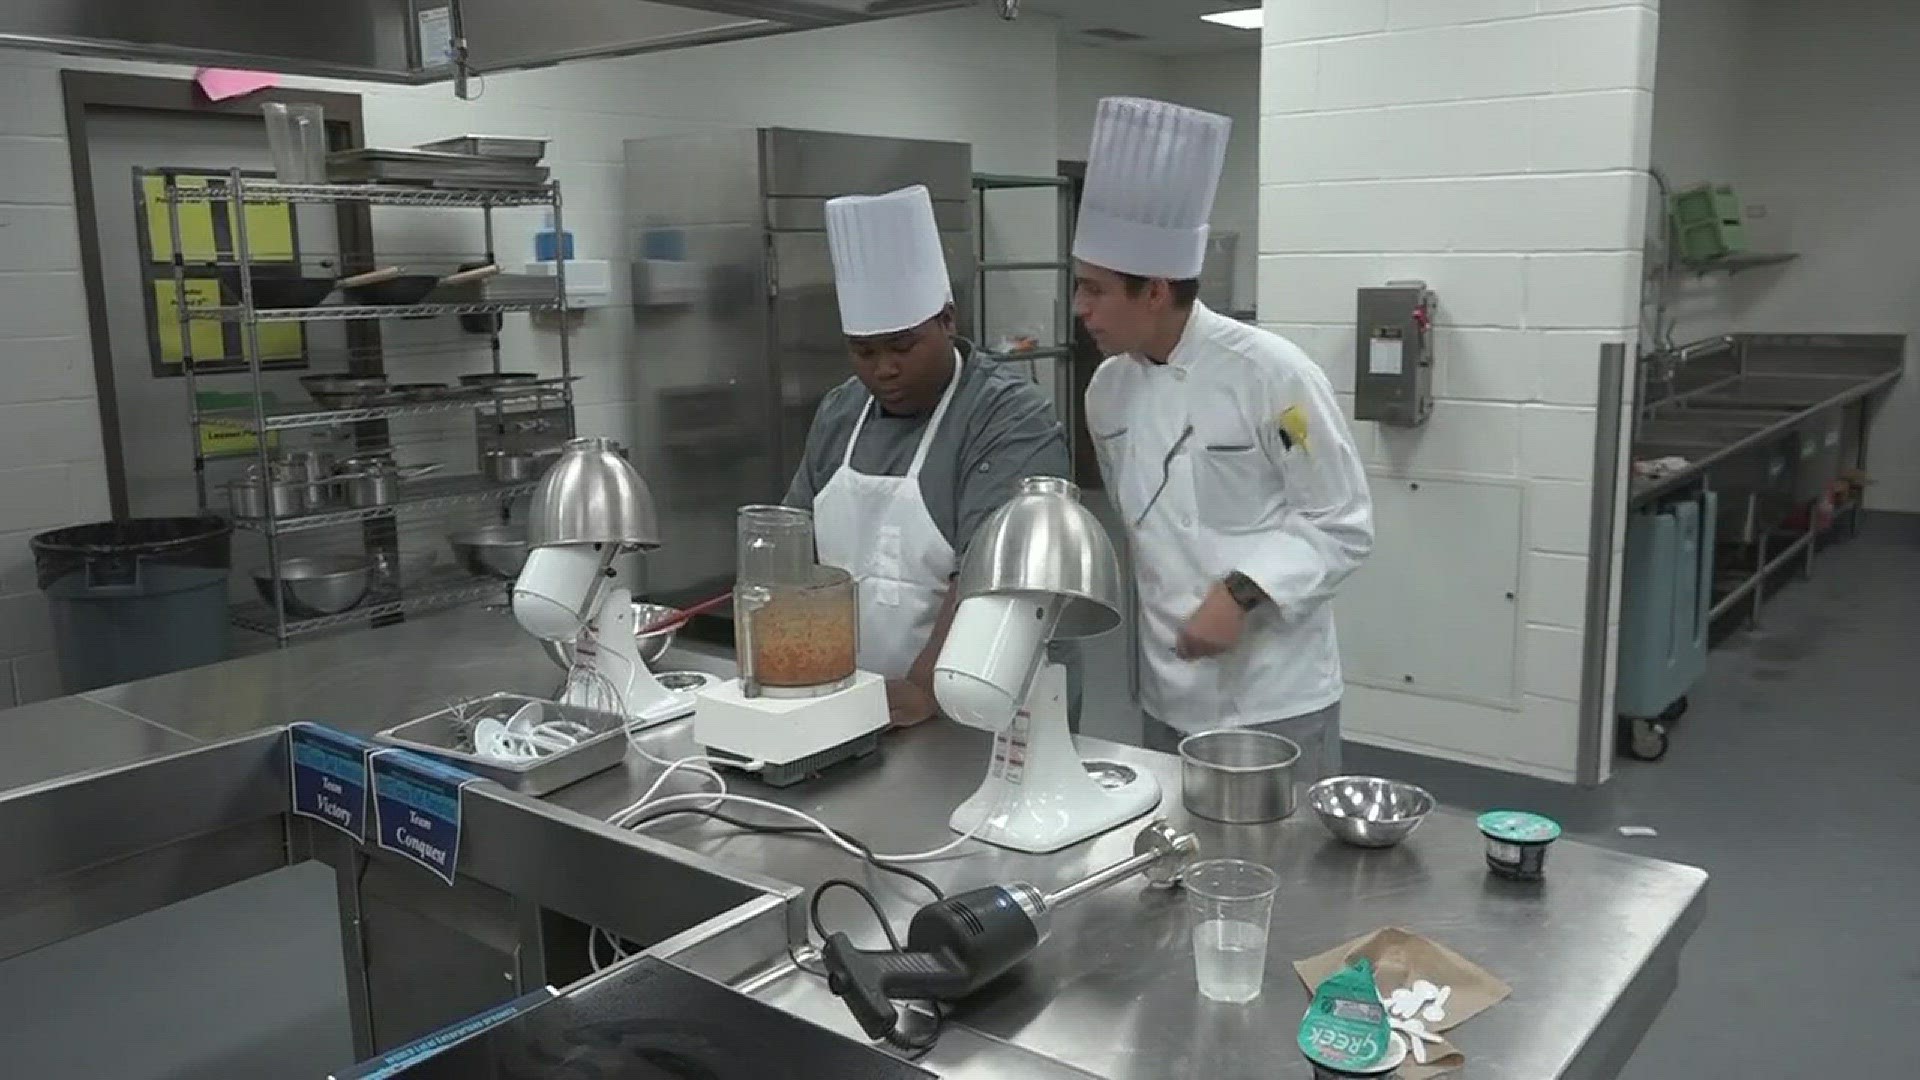 Young chefs from around San Antonio got a chance to compete in the 2017 junior chef competition at Sam Houston High School on the east side.